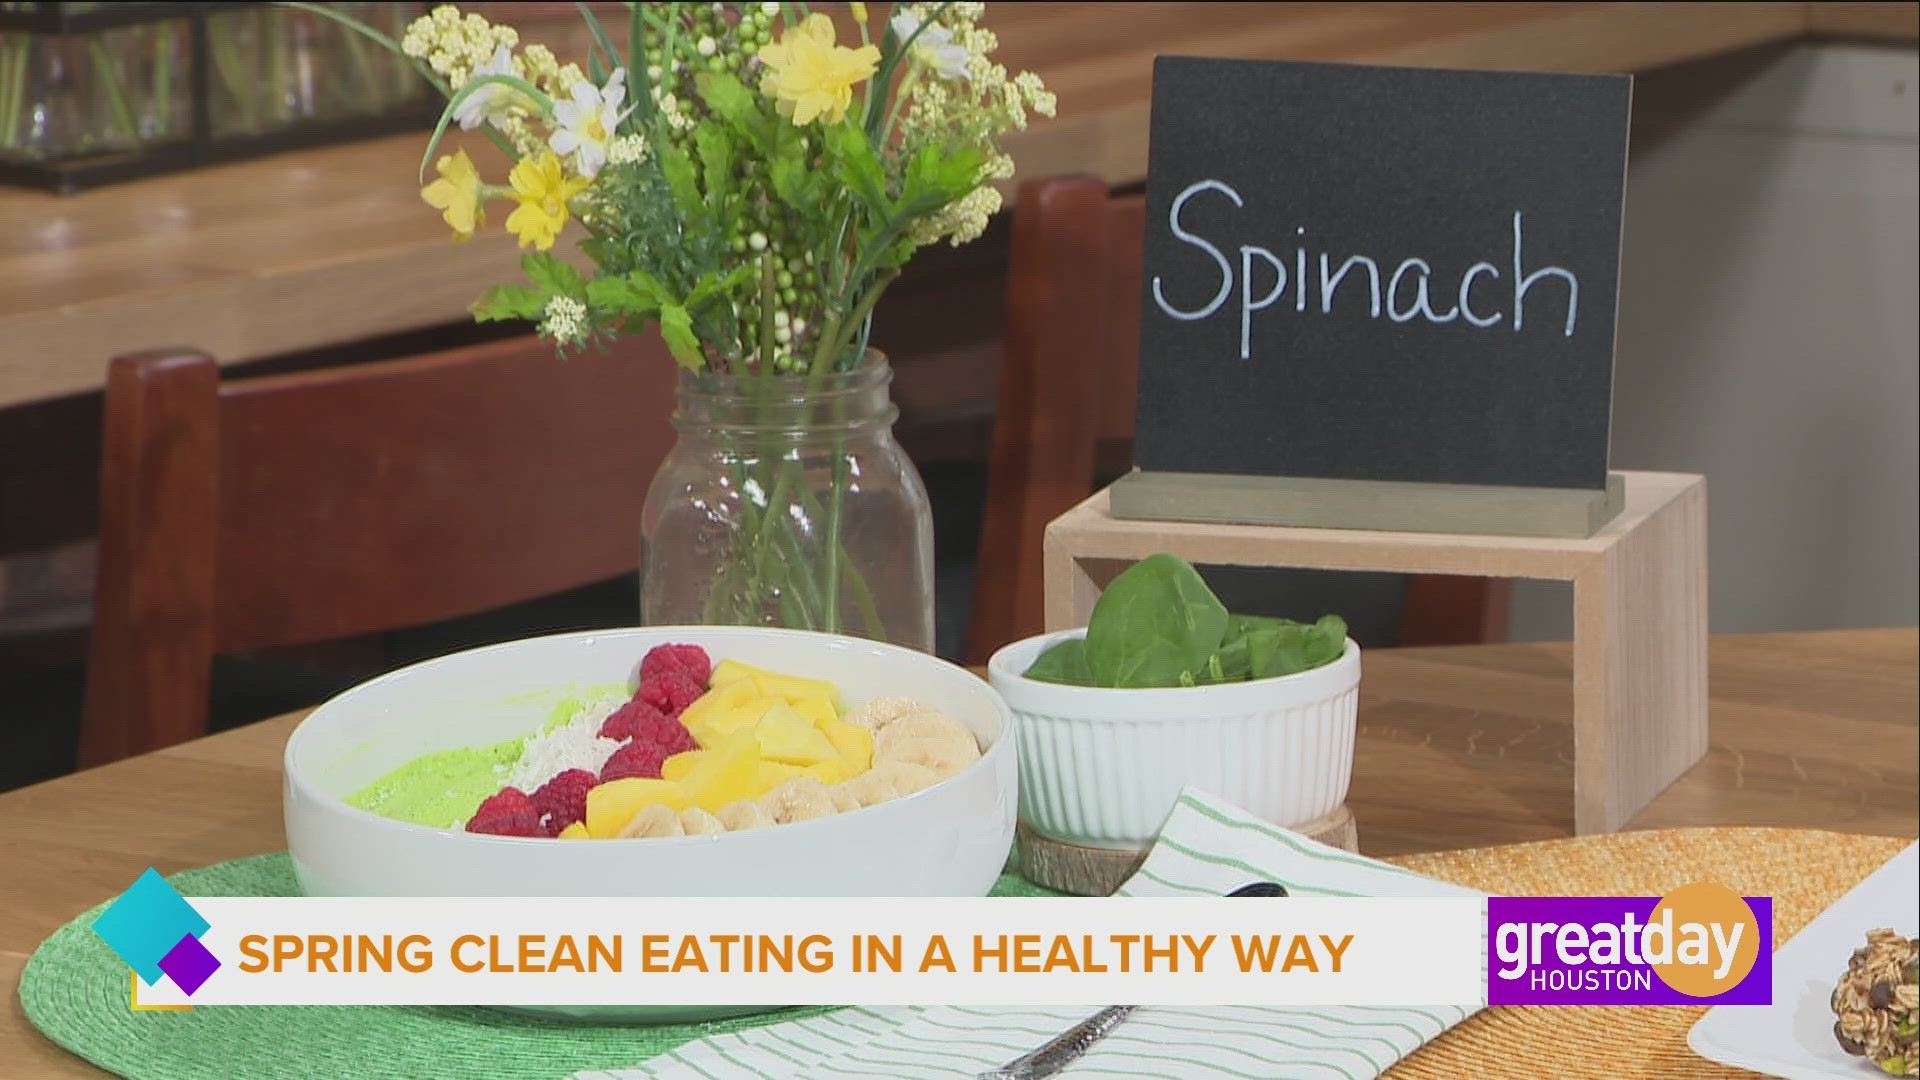 Registered Dietitian Amy Goodson shares how you can spring clean your diet in 30 days.